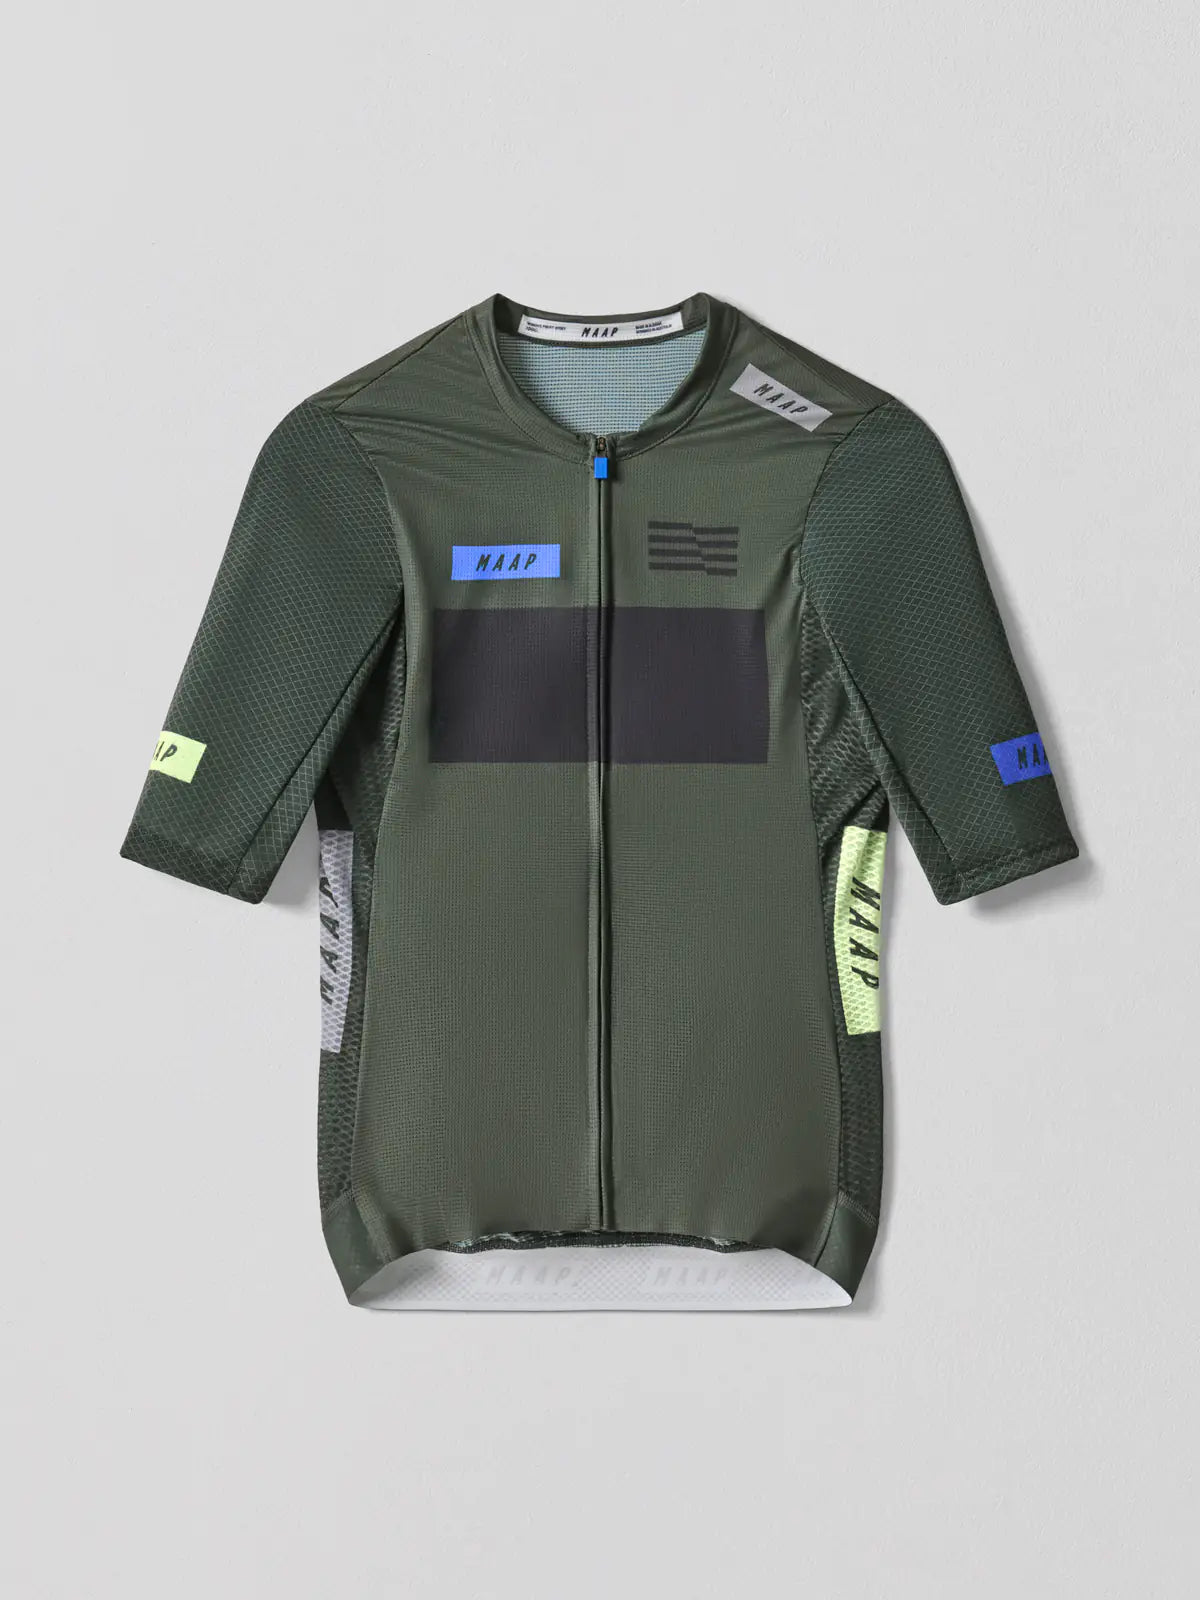 MAAP System Pro Air Jersey Bronze Green レディース サイクル ジャージ | CYCLISM